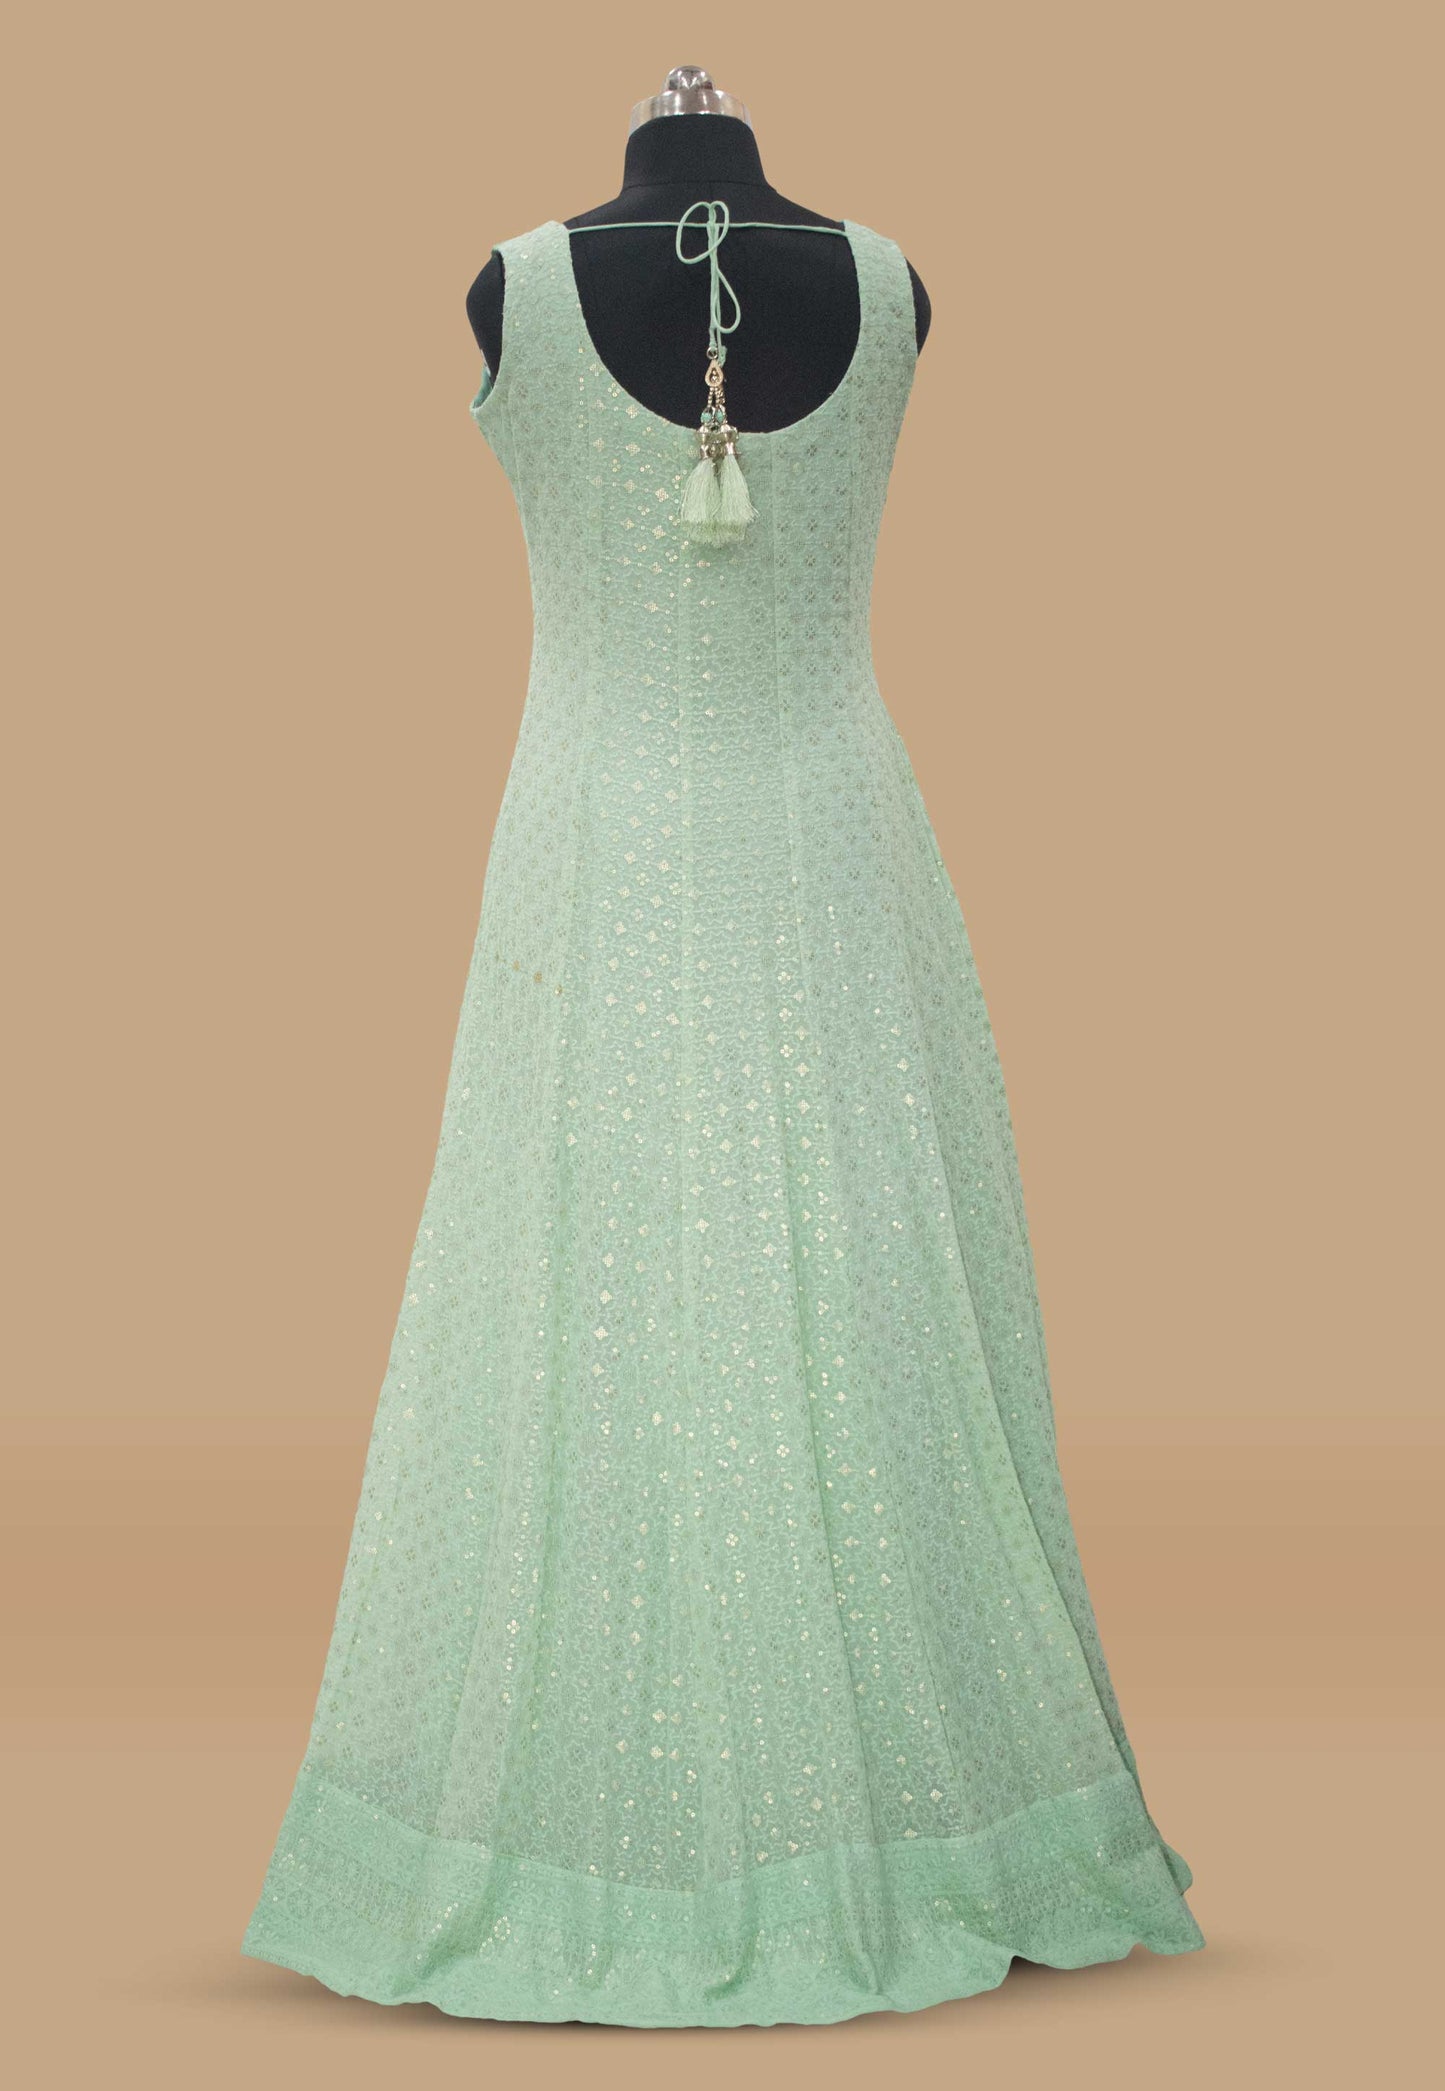 Embroidered Georgette Suit in Sea Green